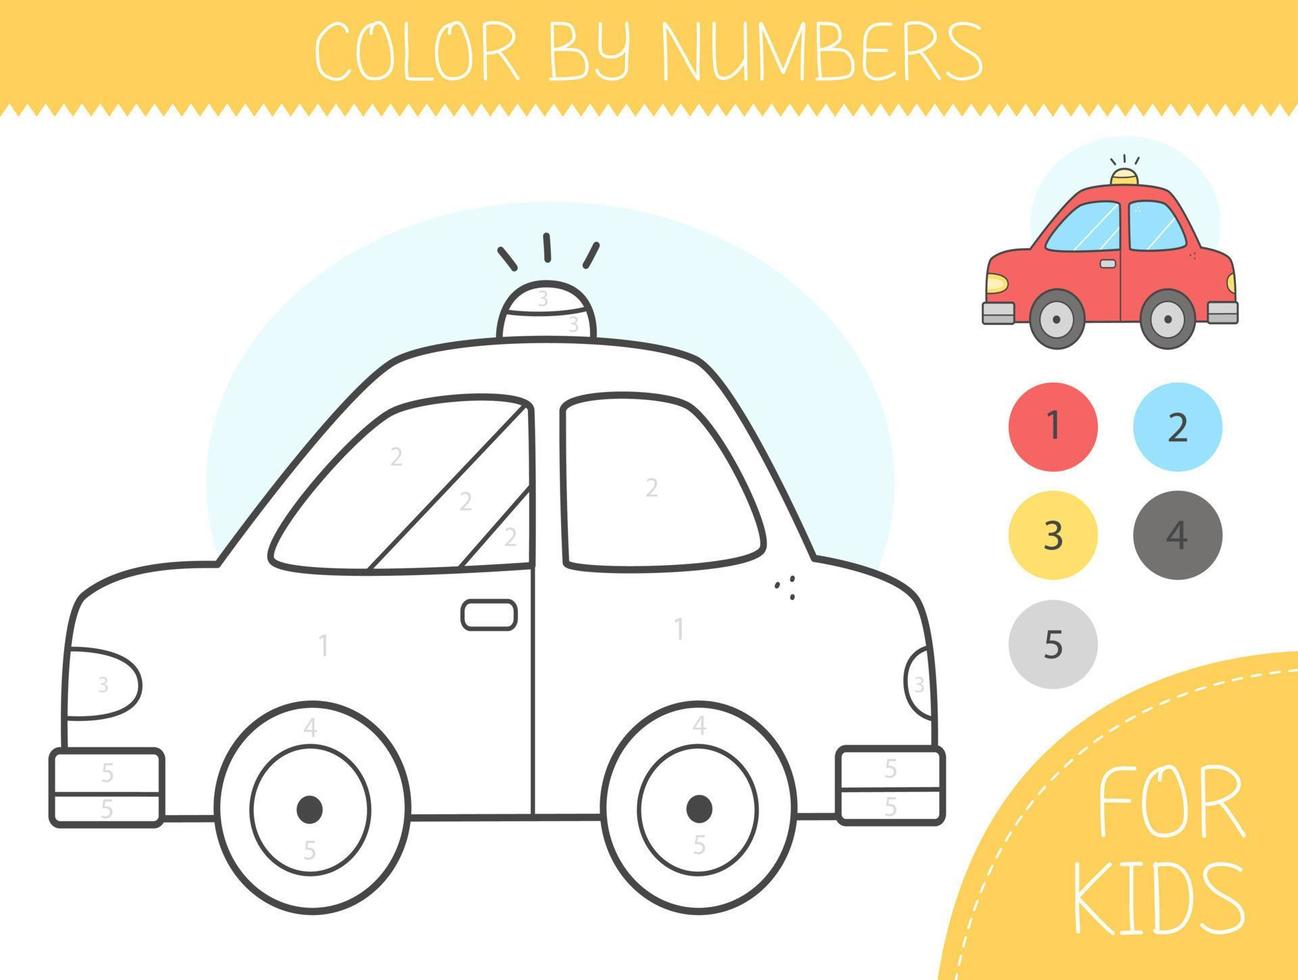 Color by numbers coloring page for kids with car. Coloring book with cute cartoon car with an example for coloring. Monochrome and color versions. Vector illustration.